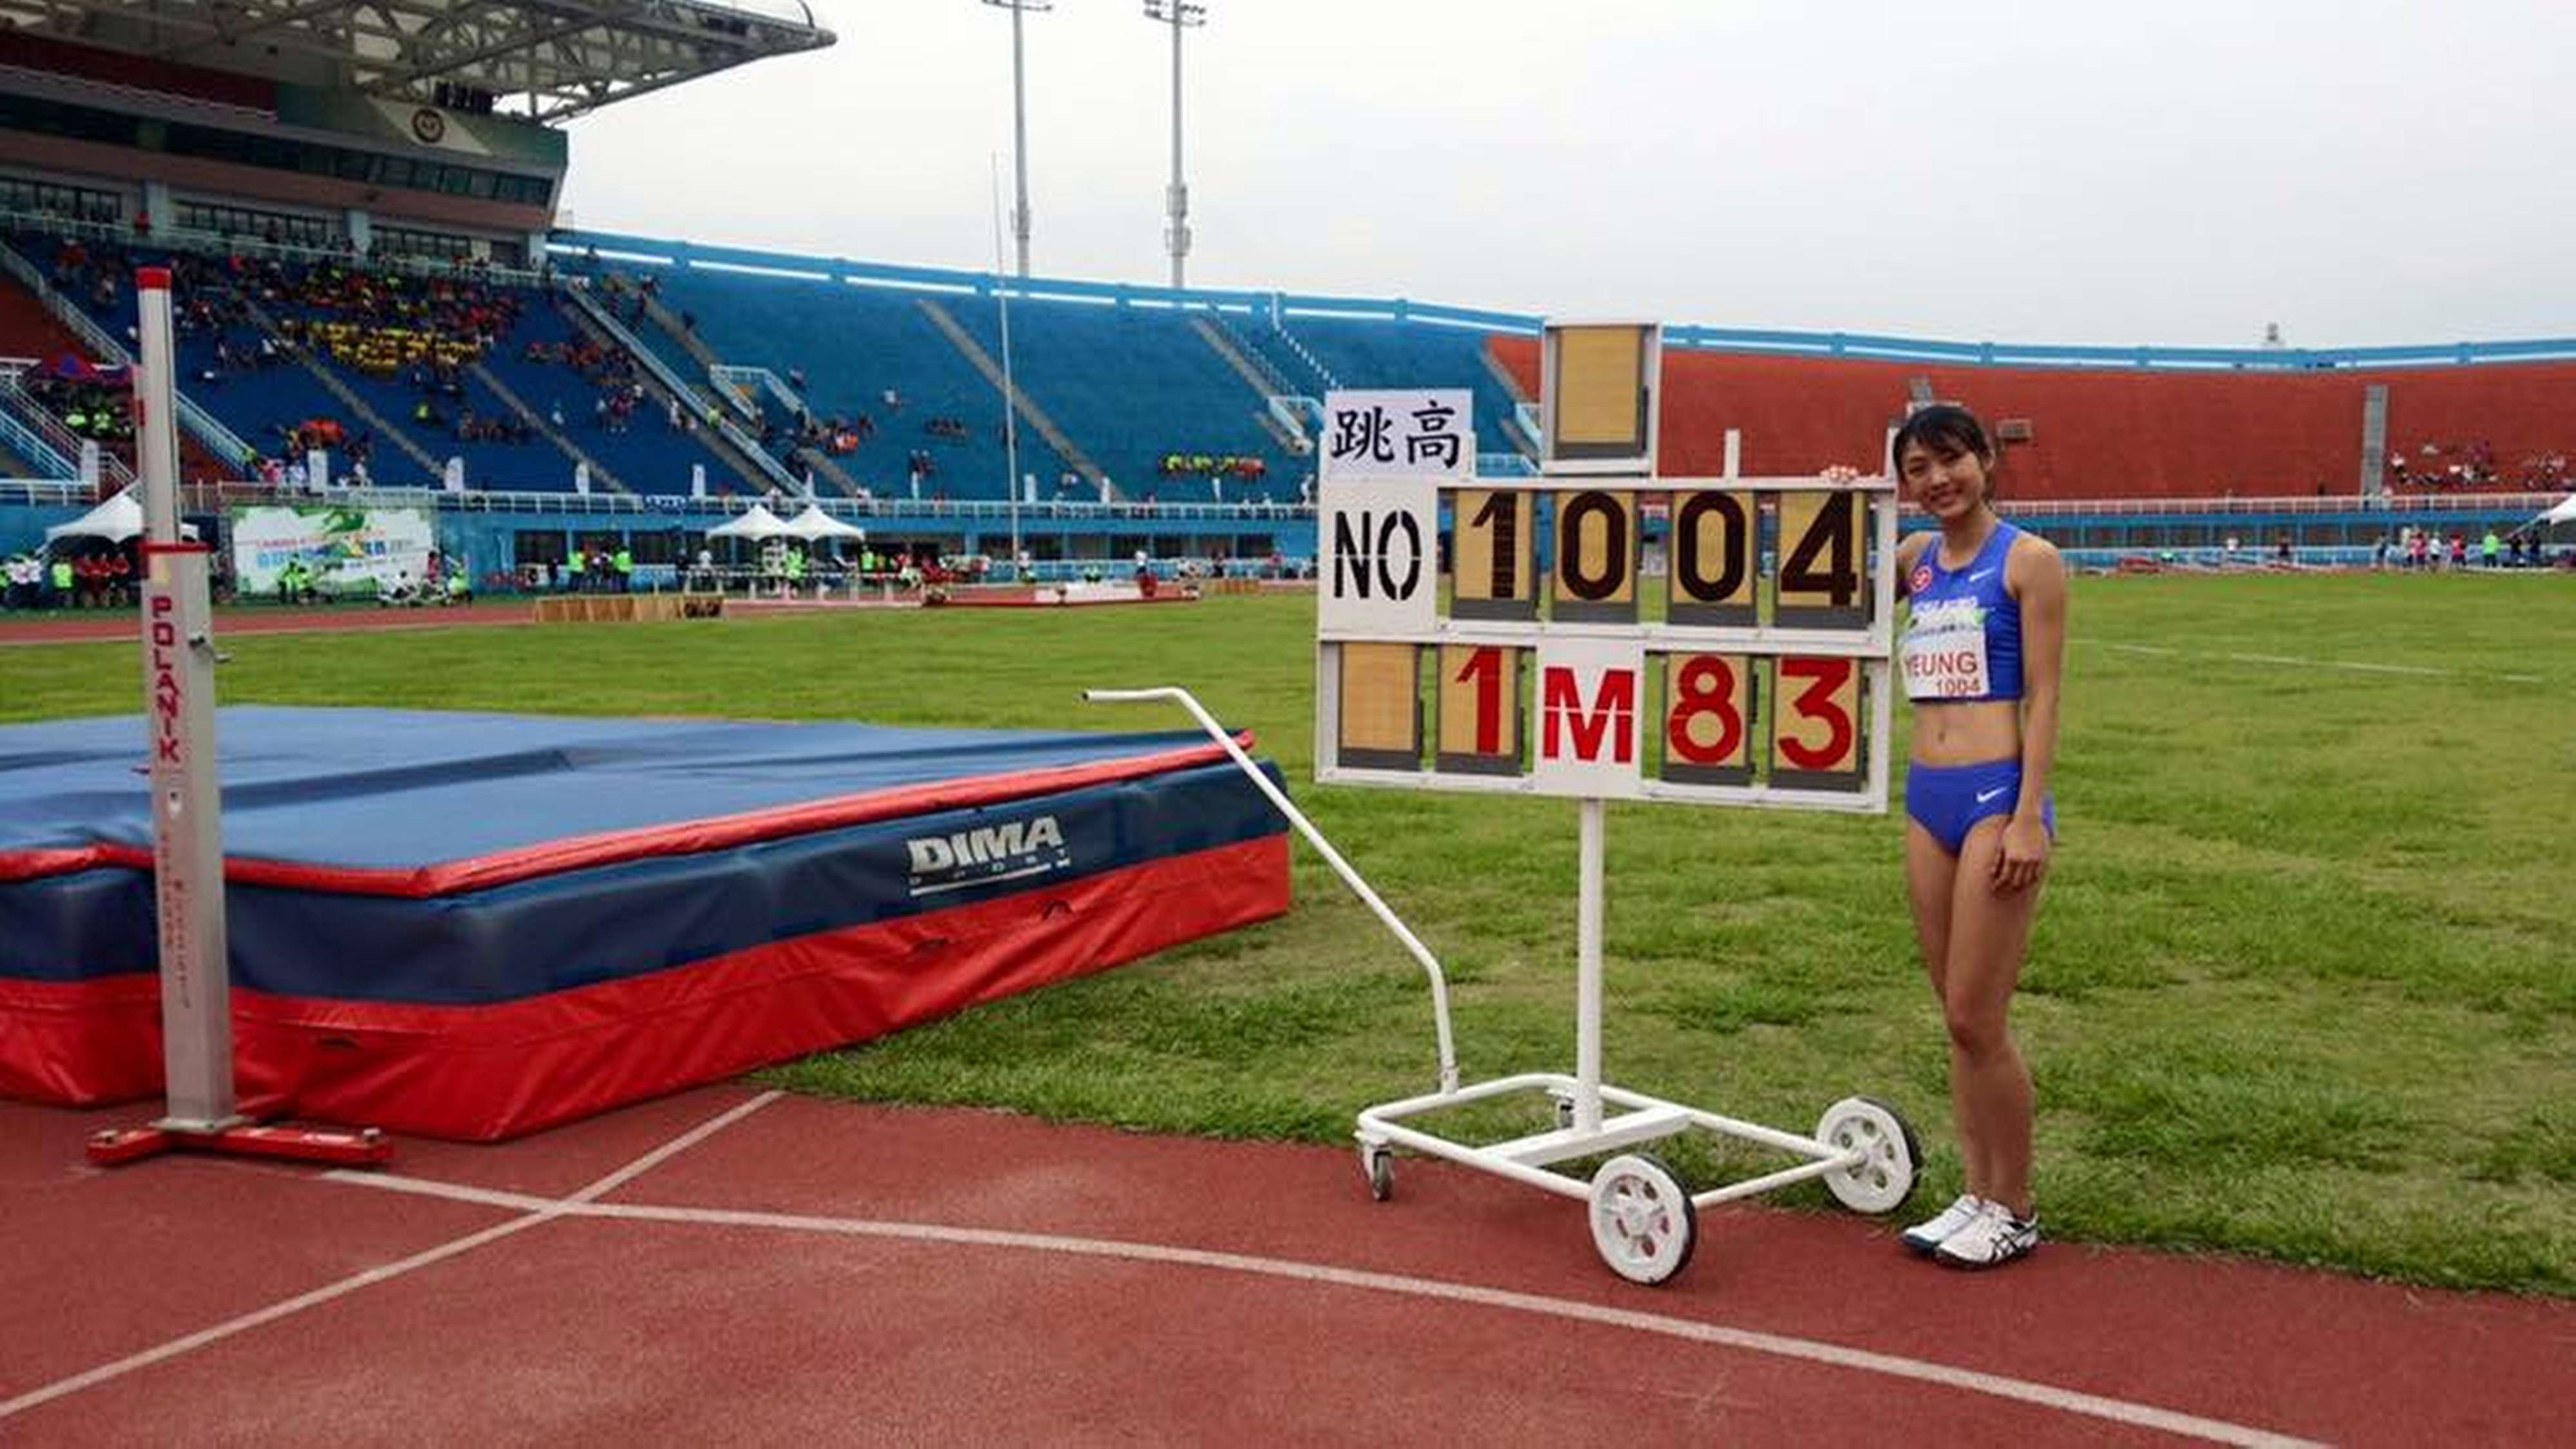 Hong Kong’s Yeung Man-wai surprises herself after breaking her own Hong Kong record by clearing 1.83 metres to win the women’s high jump at the 2016 Taiwan Athletics Open in Taoyuan. Photos: Hong Kong Amateur Athletic Association